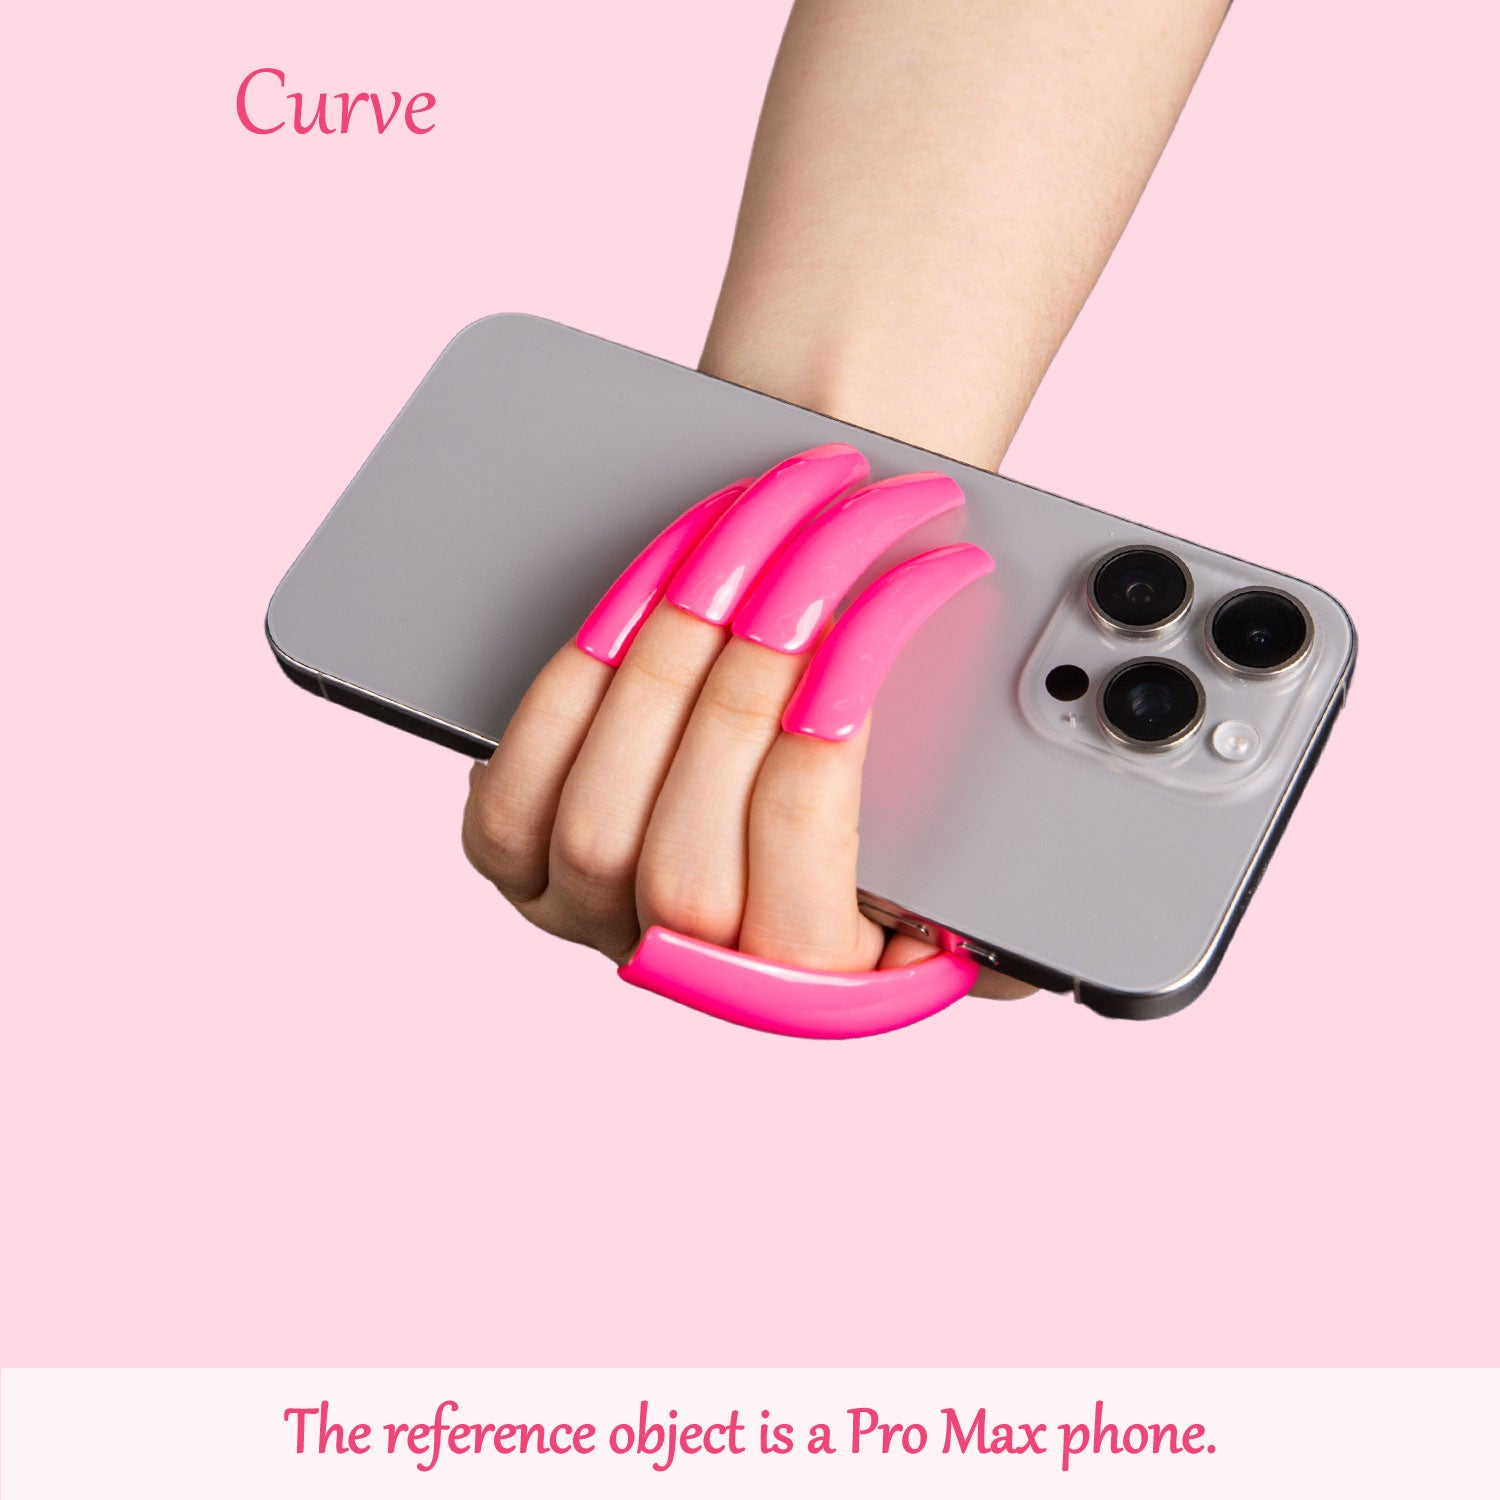 Hand with bright pink curved press-on nails holding a Pro Max phone against a light pink background. Text on the image reads 'Curve' and 'The reference object is a Pro Max phone.'